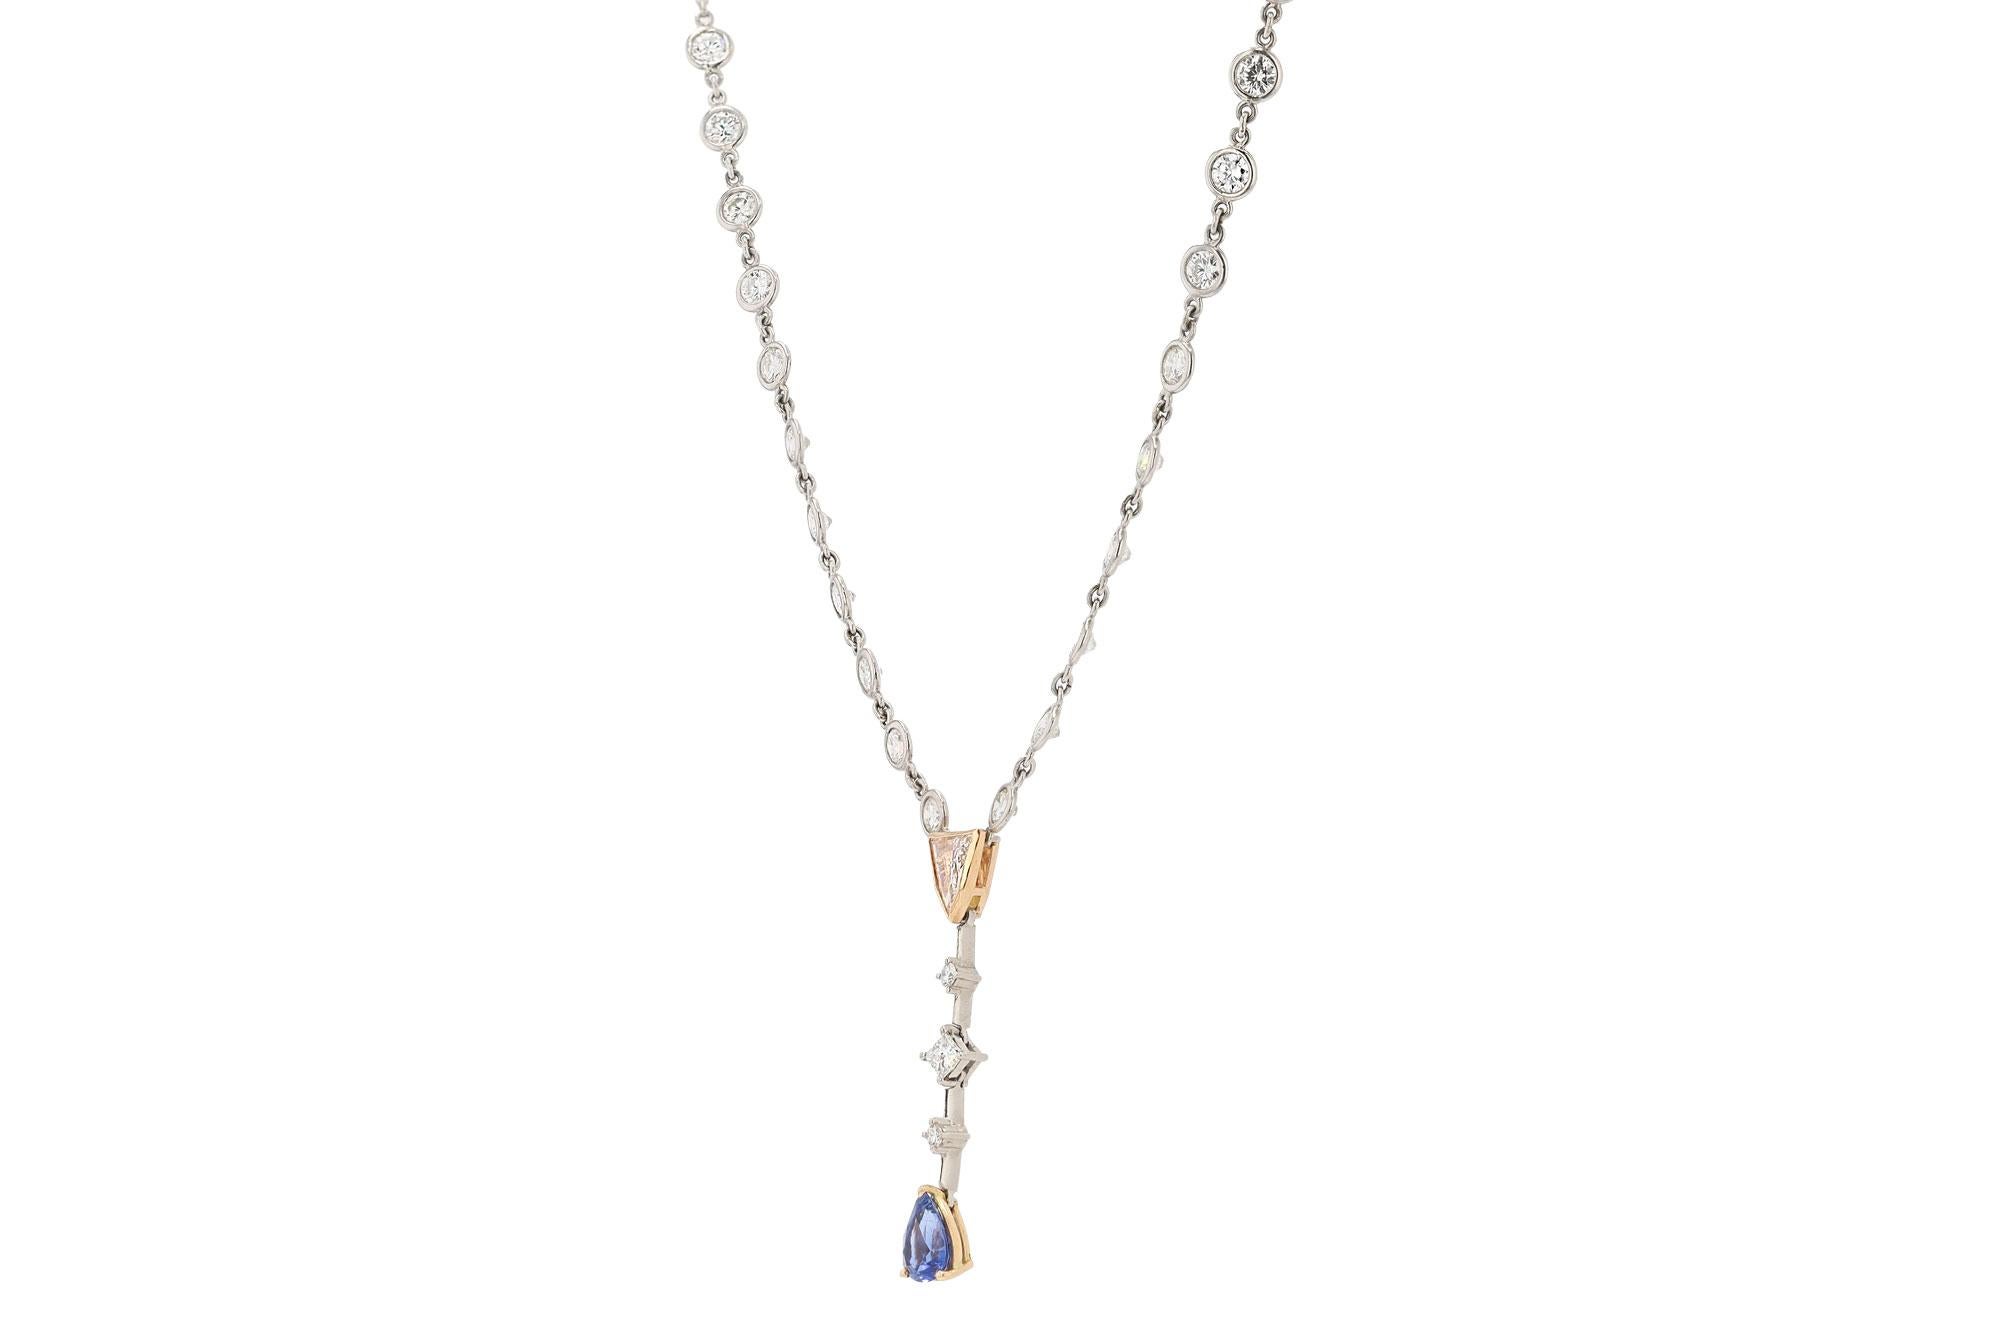 A most interesting Mid Century modern diamond and sapphire drop necklace; part diamonds by the yard, part V necklace. Subtle enough to wear everyday yet dramatic enough to wear on the red carpet. This Hollywood glam stunner is set with 5 carats of